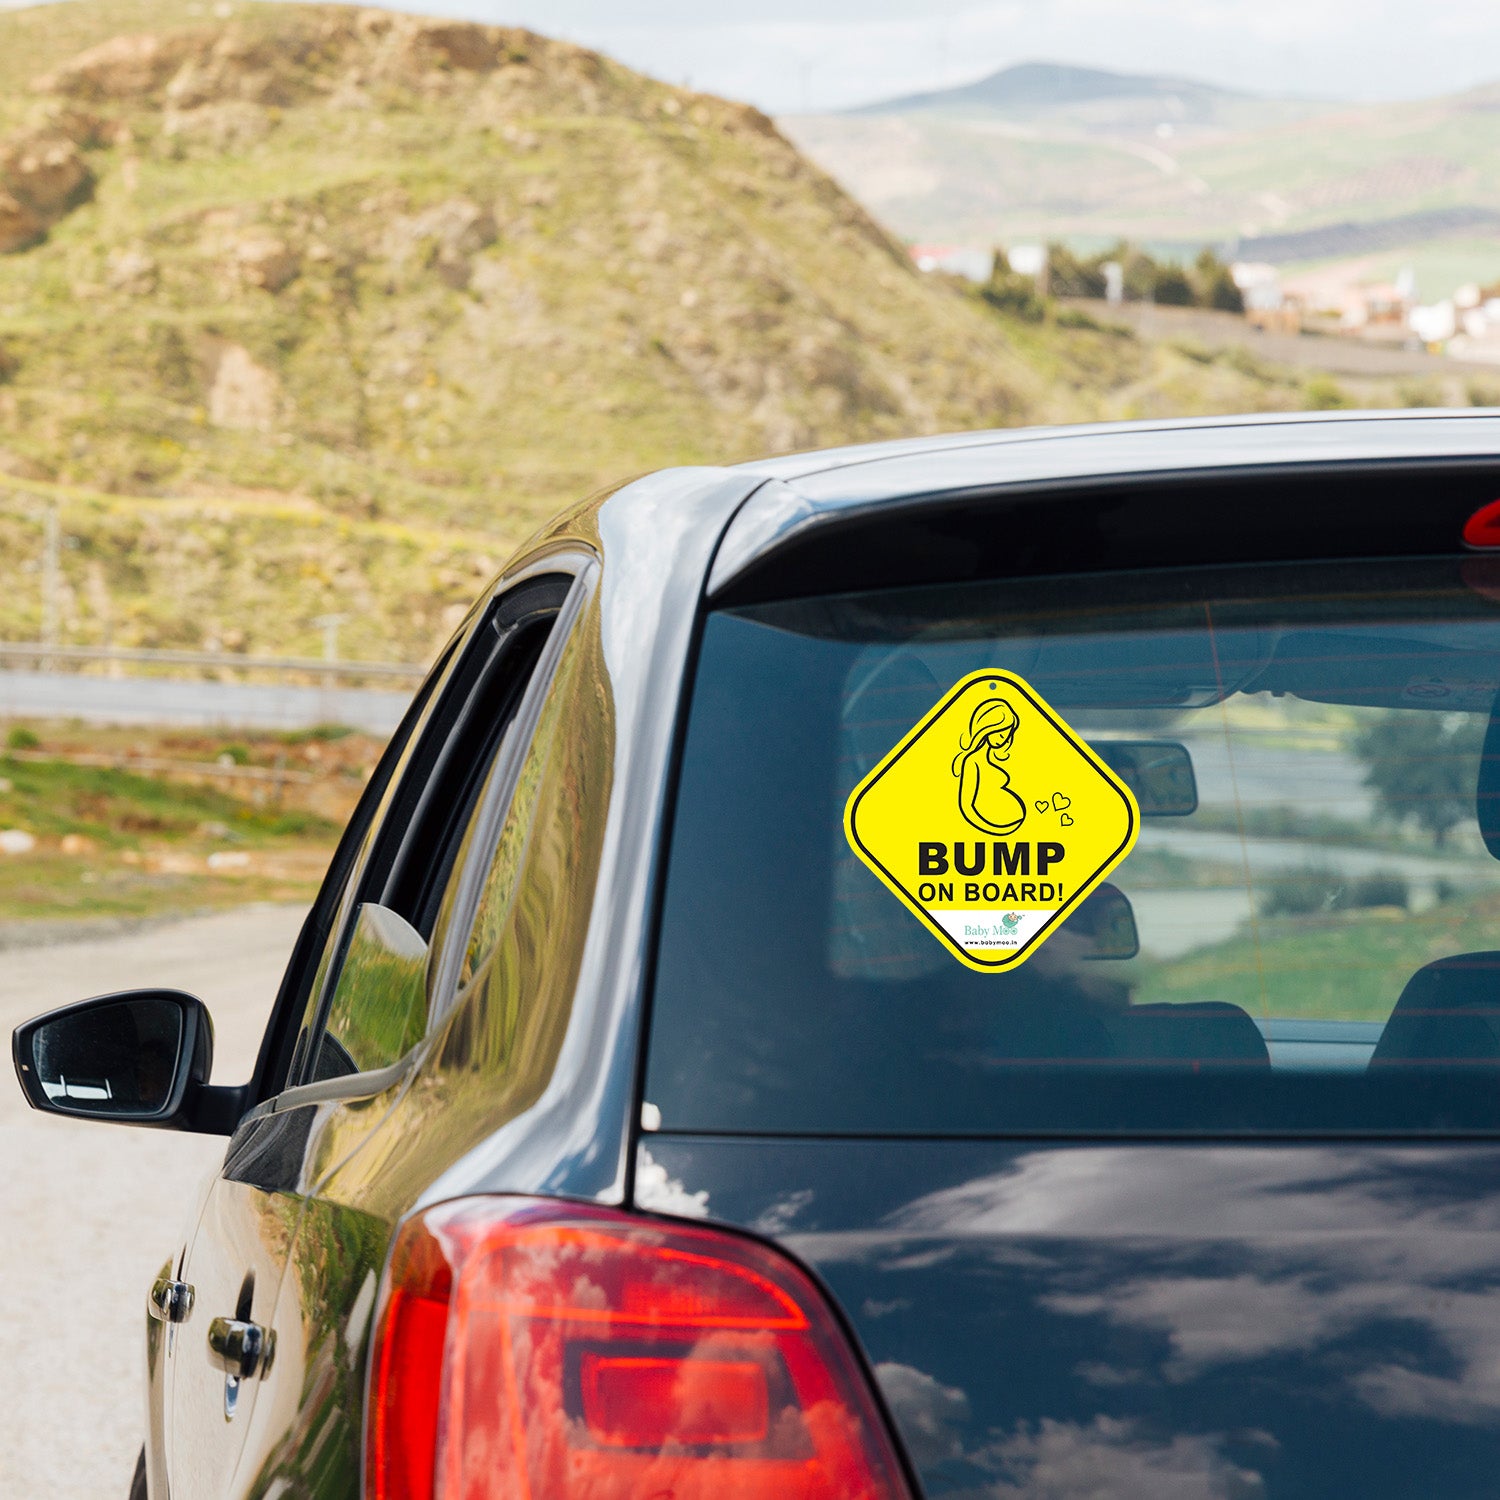 Baby Moo Bump And Baby On Board Car Safety Sign With Suction Cup Clip 2 Pack - Yellow